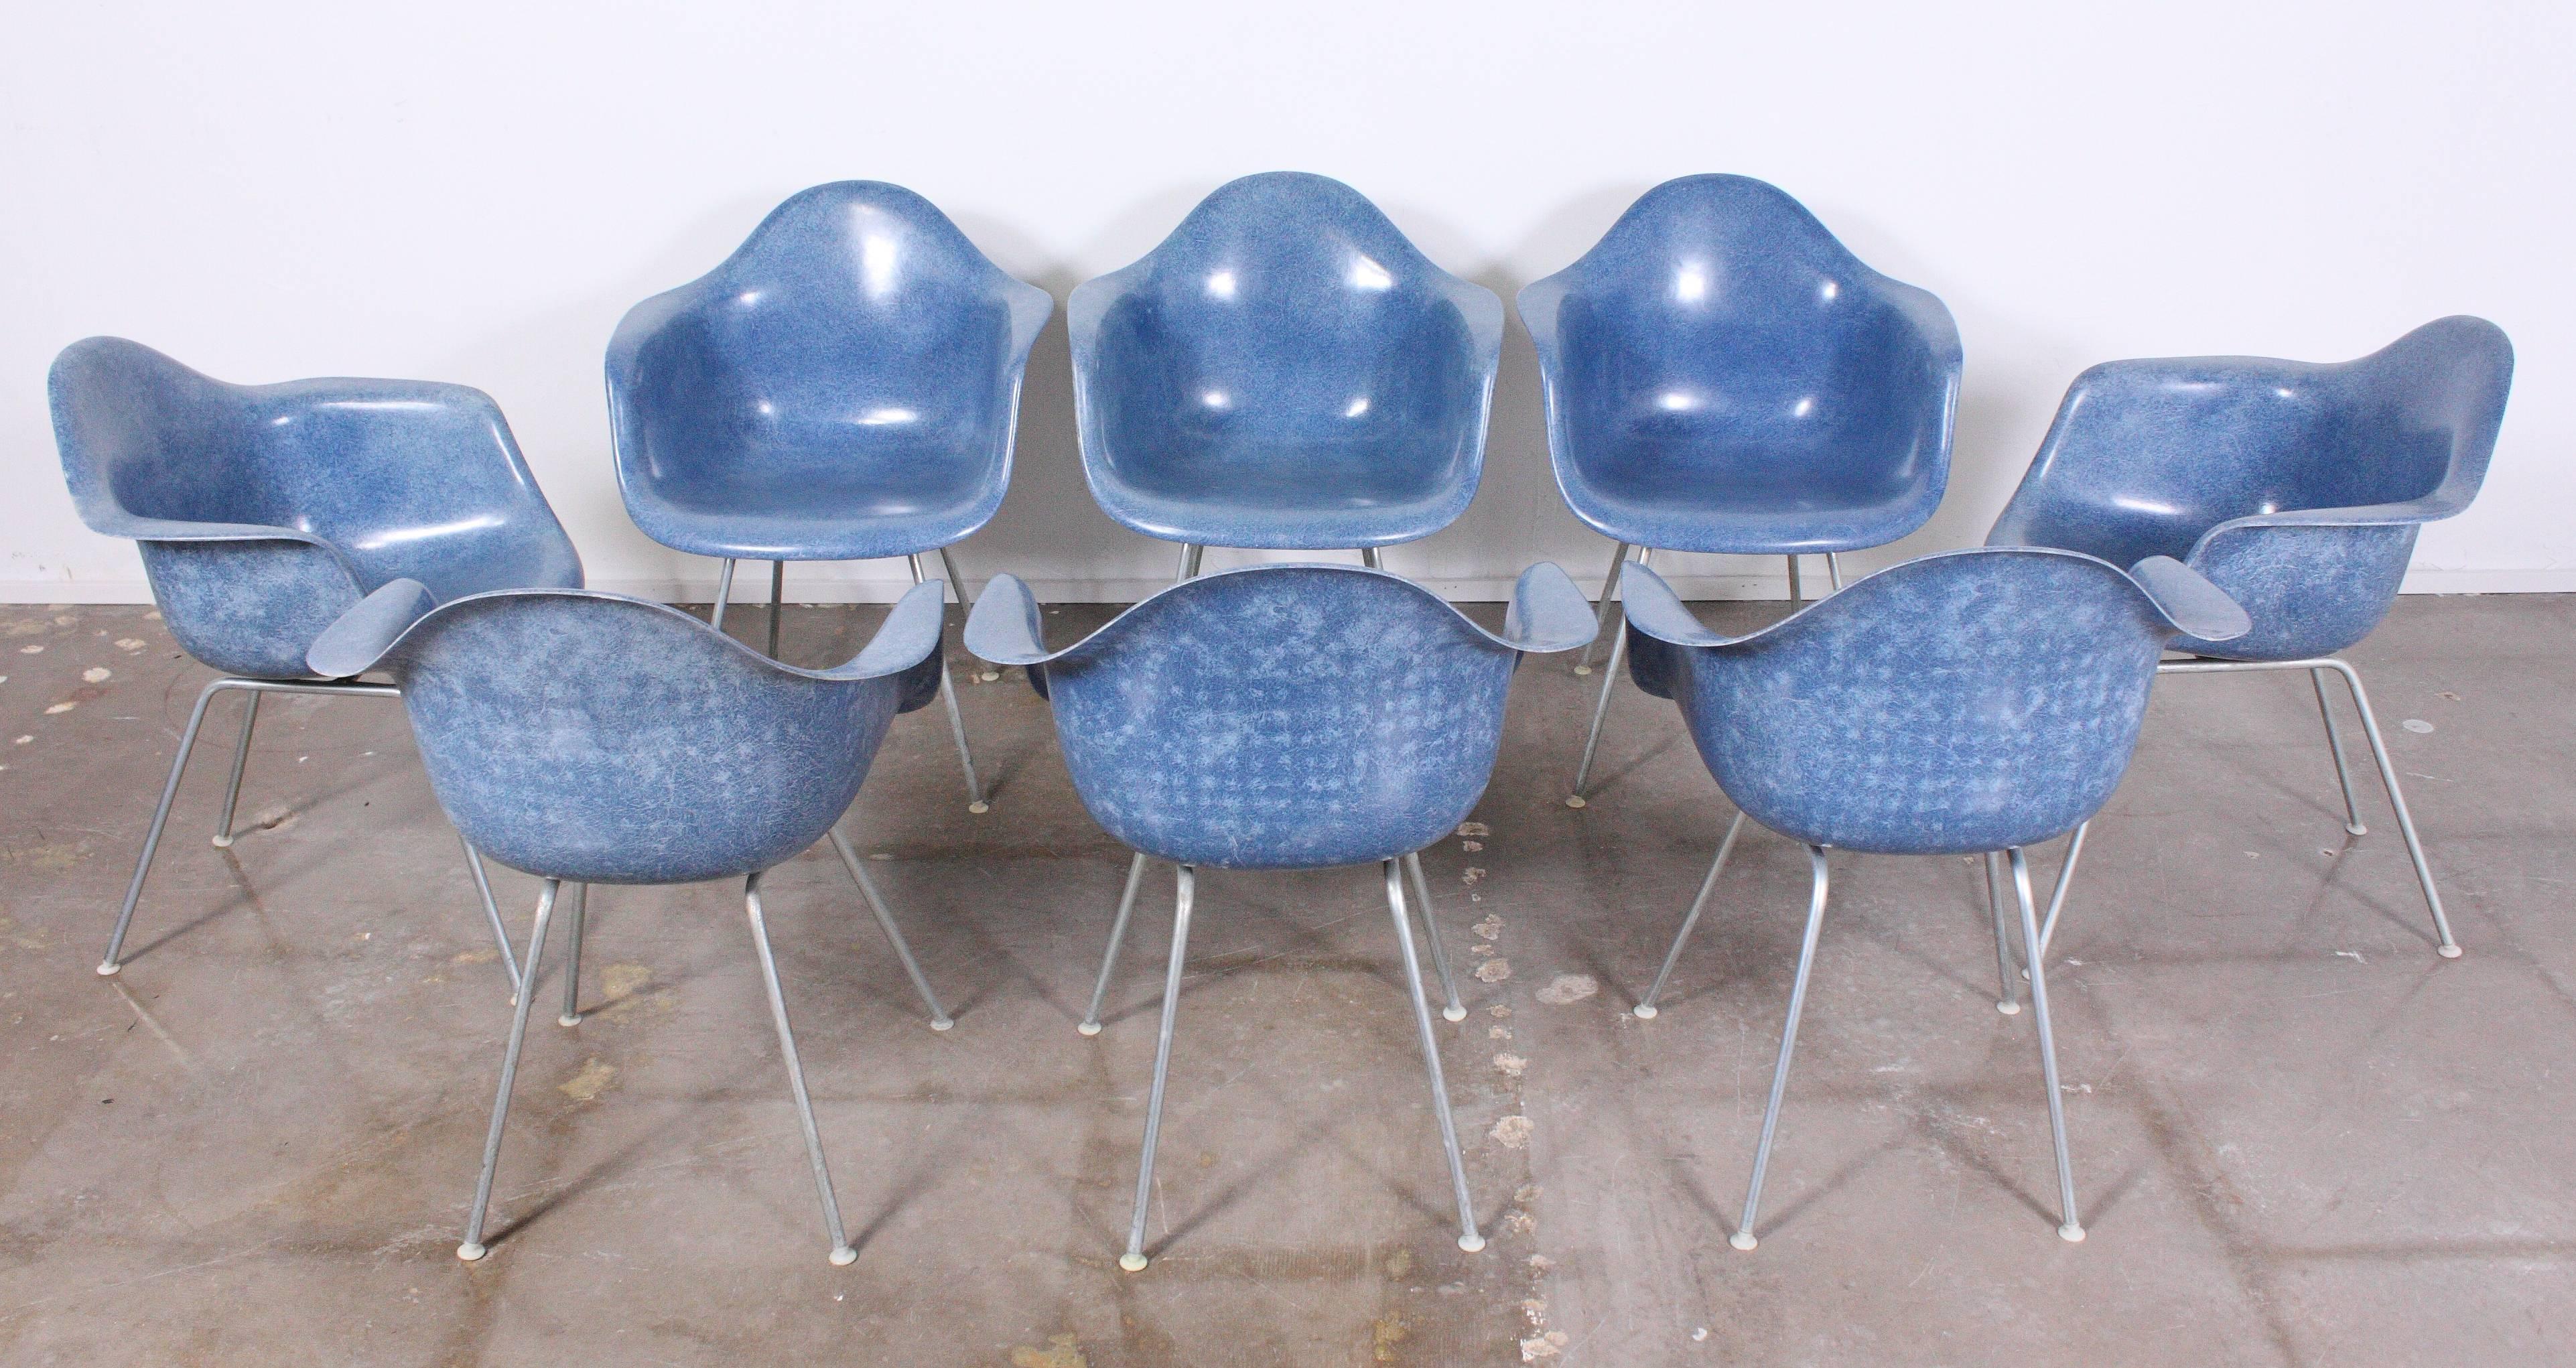 Rare set of eight, highly sought after blue fiberglass shell chairs designed by Charles and Ray Eames for Herman Miller.